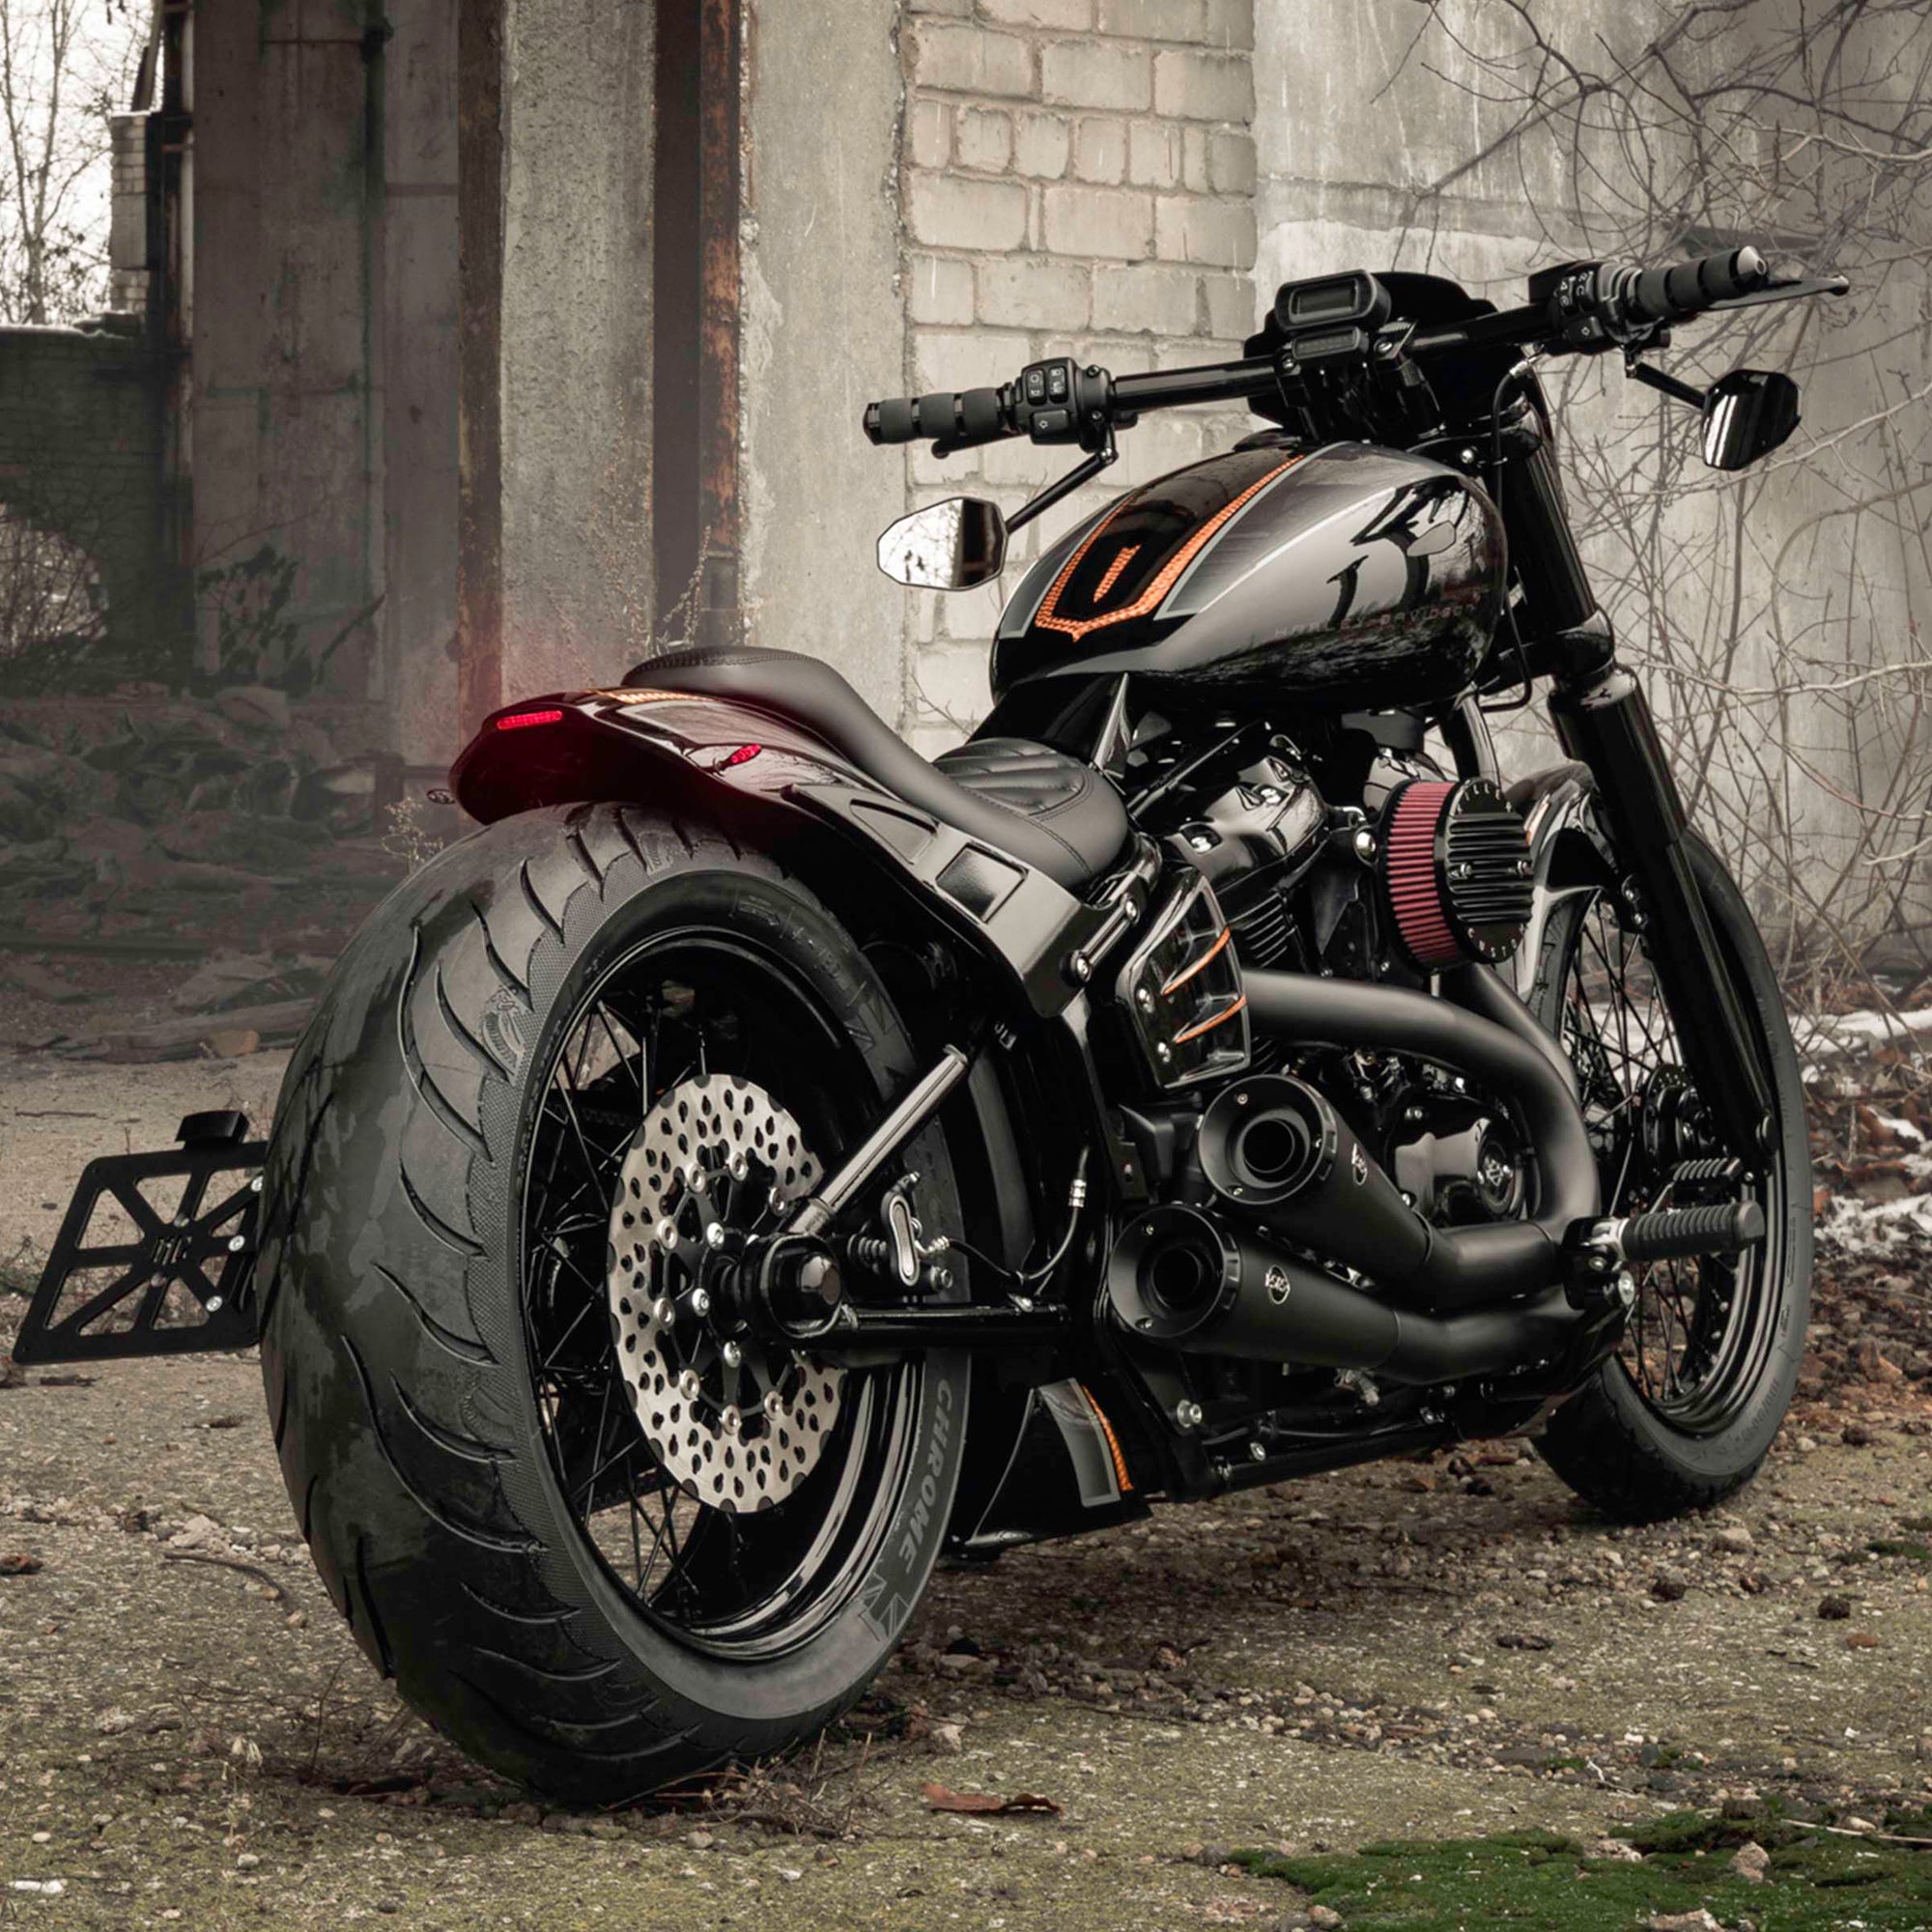 Harley Davidson motorcycle with Killer Custom parts from the rear outside in an abandoned environment